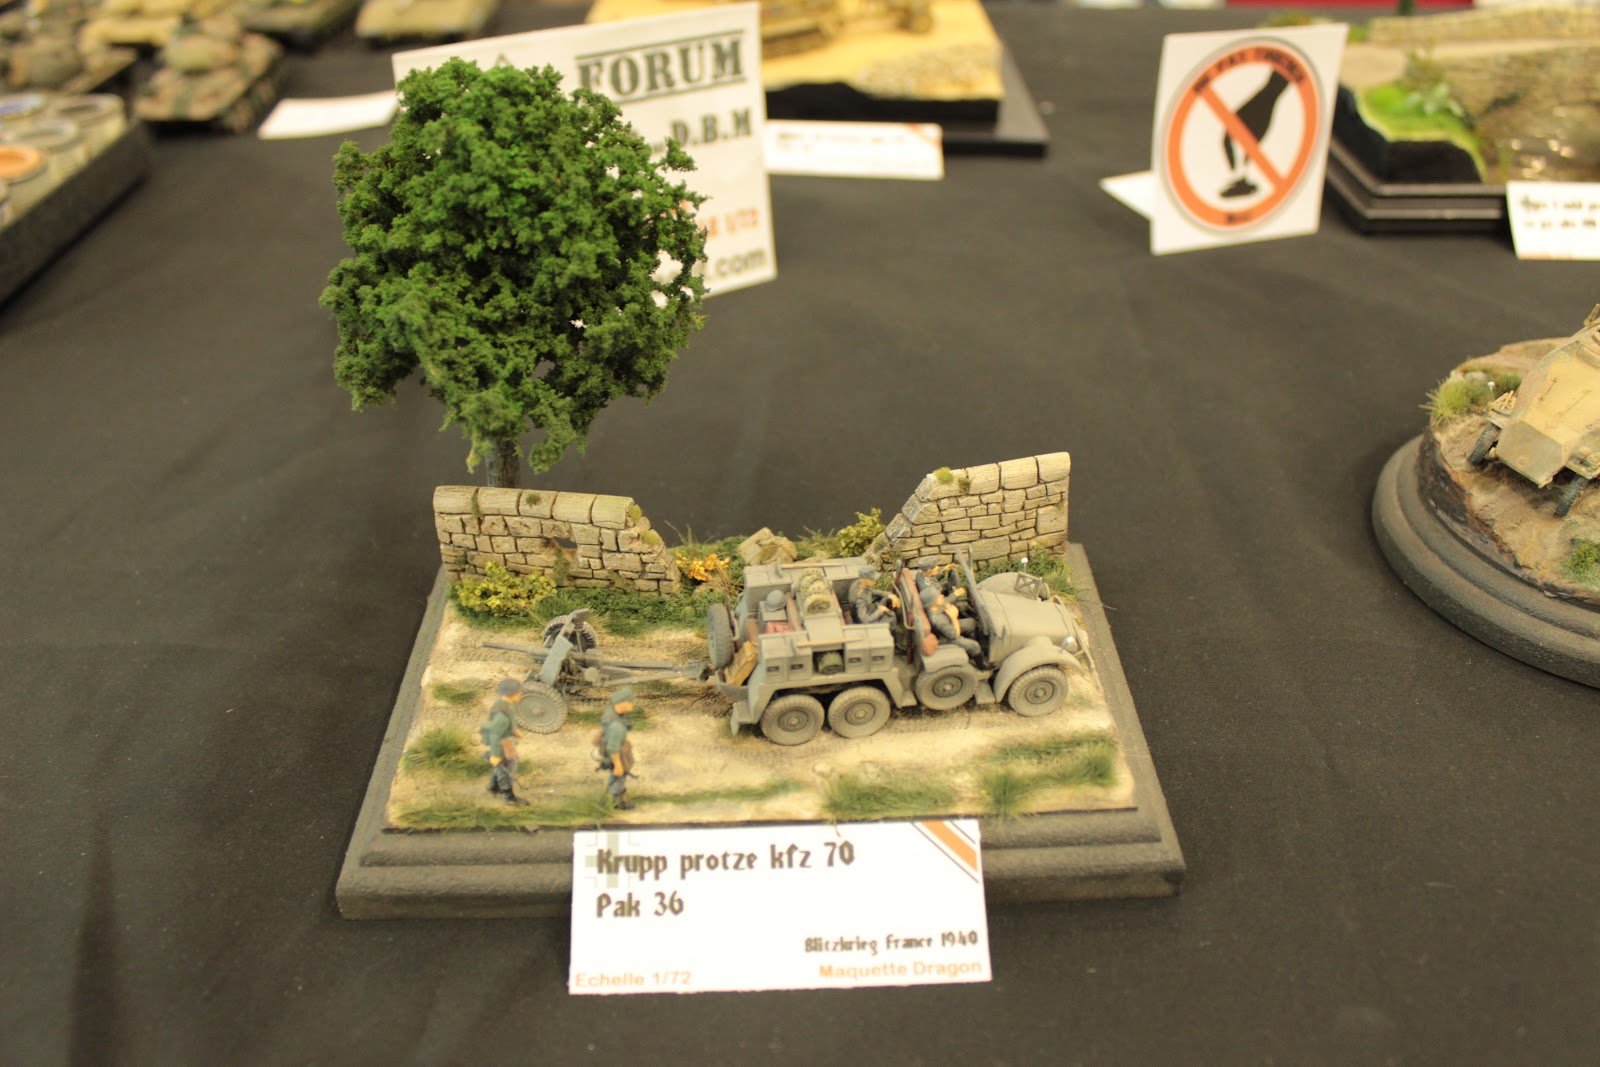 Maquettexpo 2017 14-15 octobre Hyères - Page 4 IMG_4209